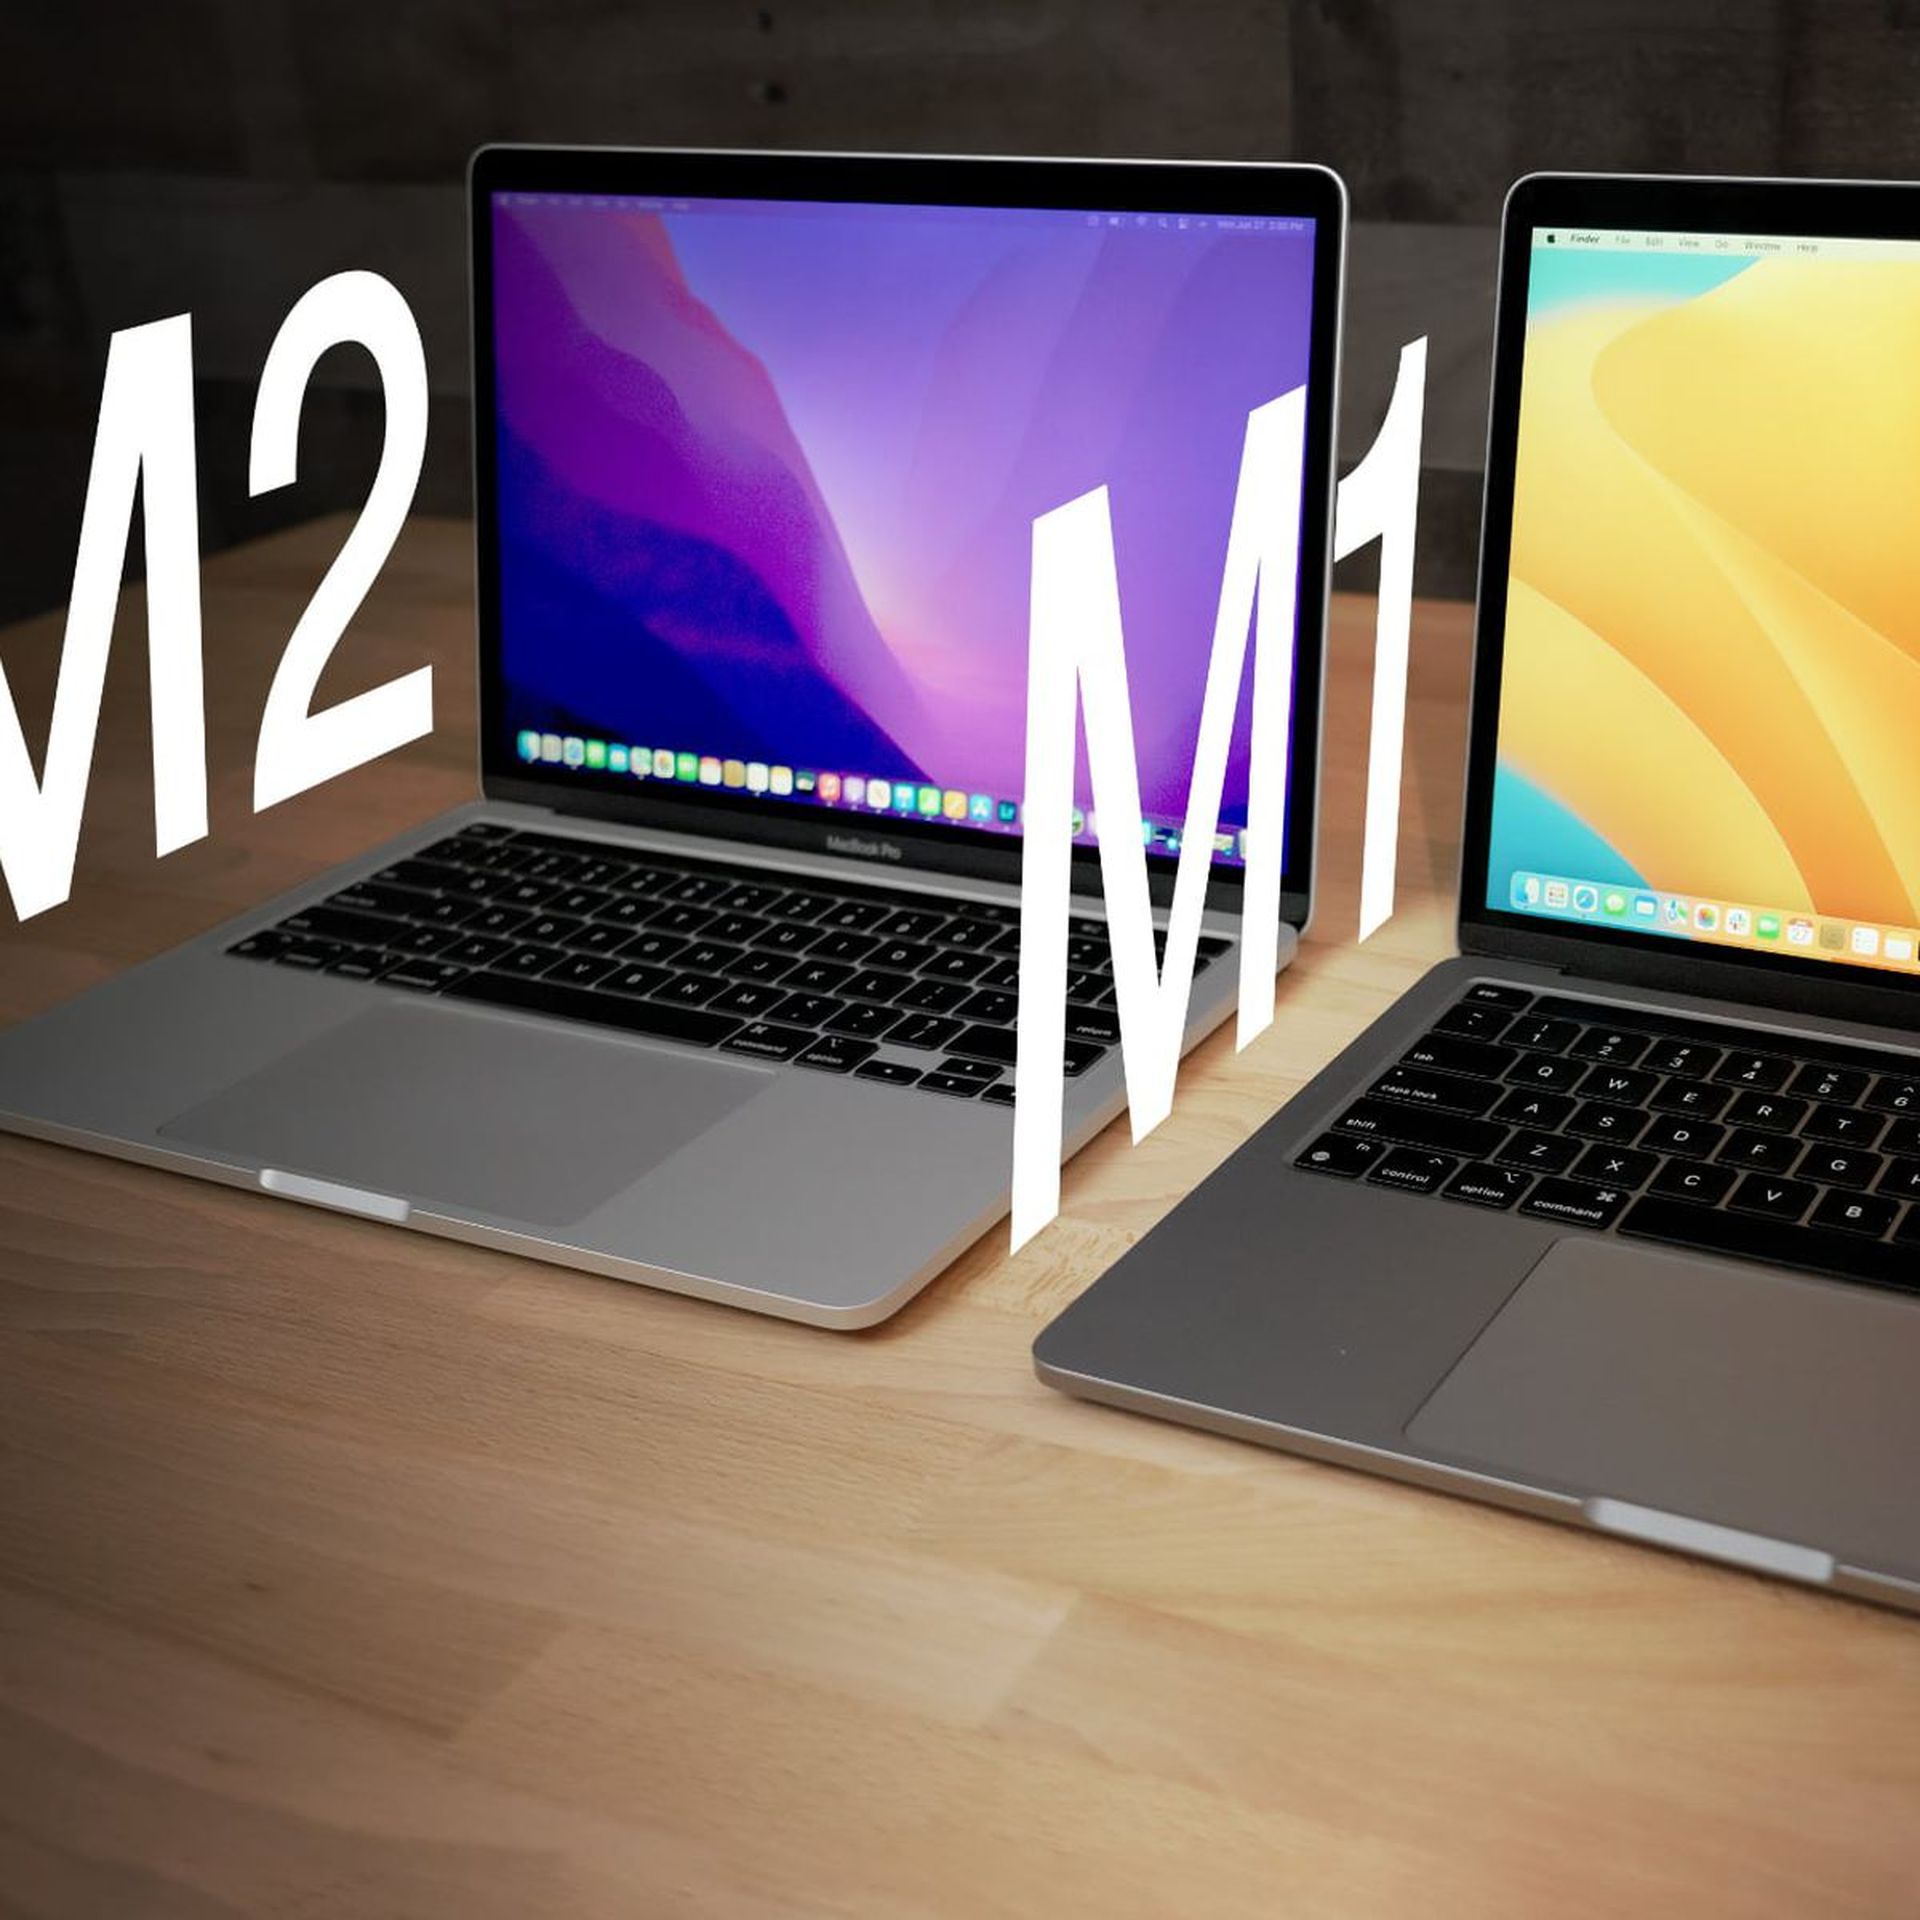 In this article, we are going to be going over our M1 MacBook Air vs M2 MacBook Air comparison, which might help you decide between the two.